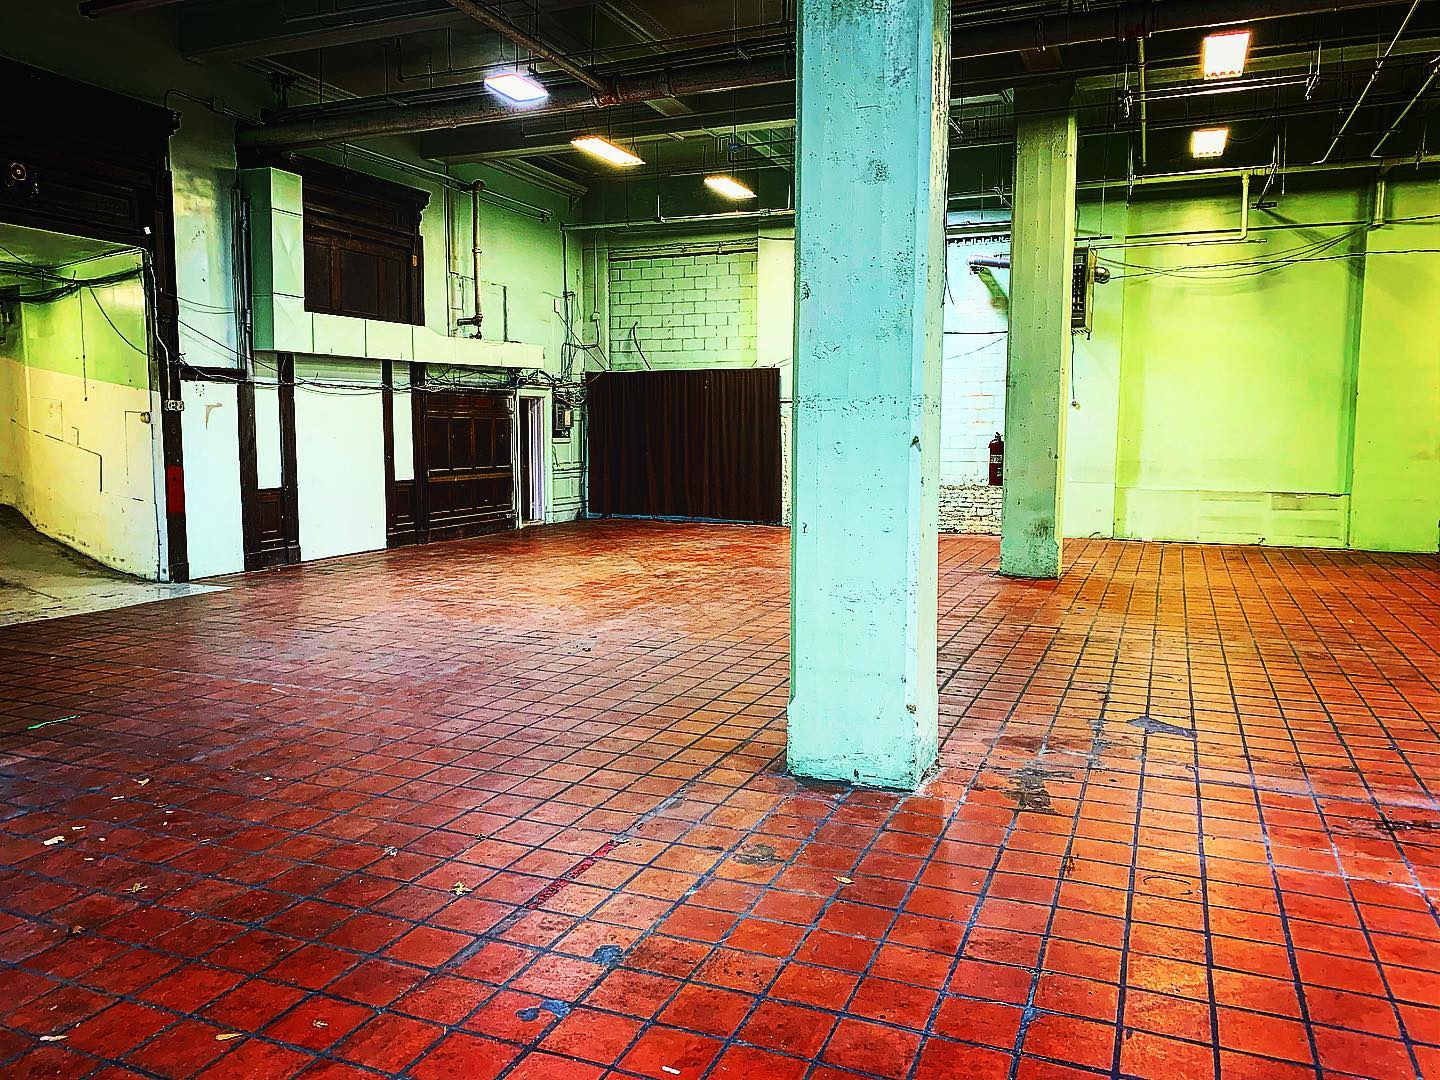 We love walking into historic spaces like this. Always makes us think of the possibilities of the future while preserving the past. 
.
.
.
#cardealership #cadillac #warehouse #loft #industrialdesign #industrial #warehouseloft #officespace #offices #newjersey #newark #nyc #fidi #flatiron #chelsea #vision #officeinspo #officeinspiration #highceilings #noceilings